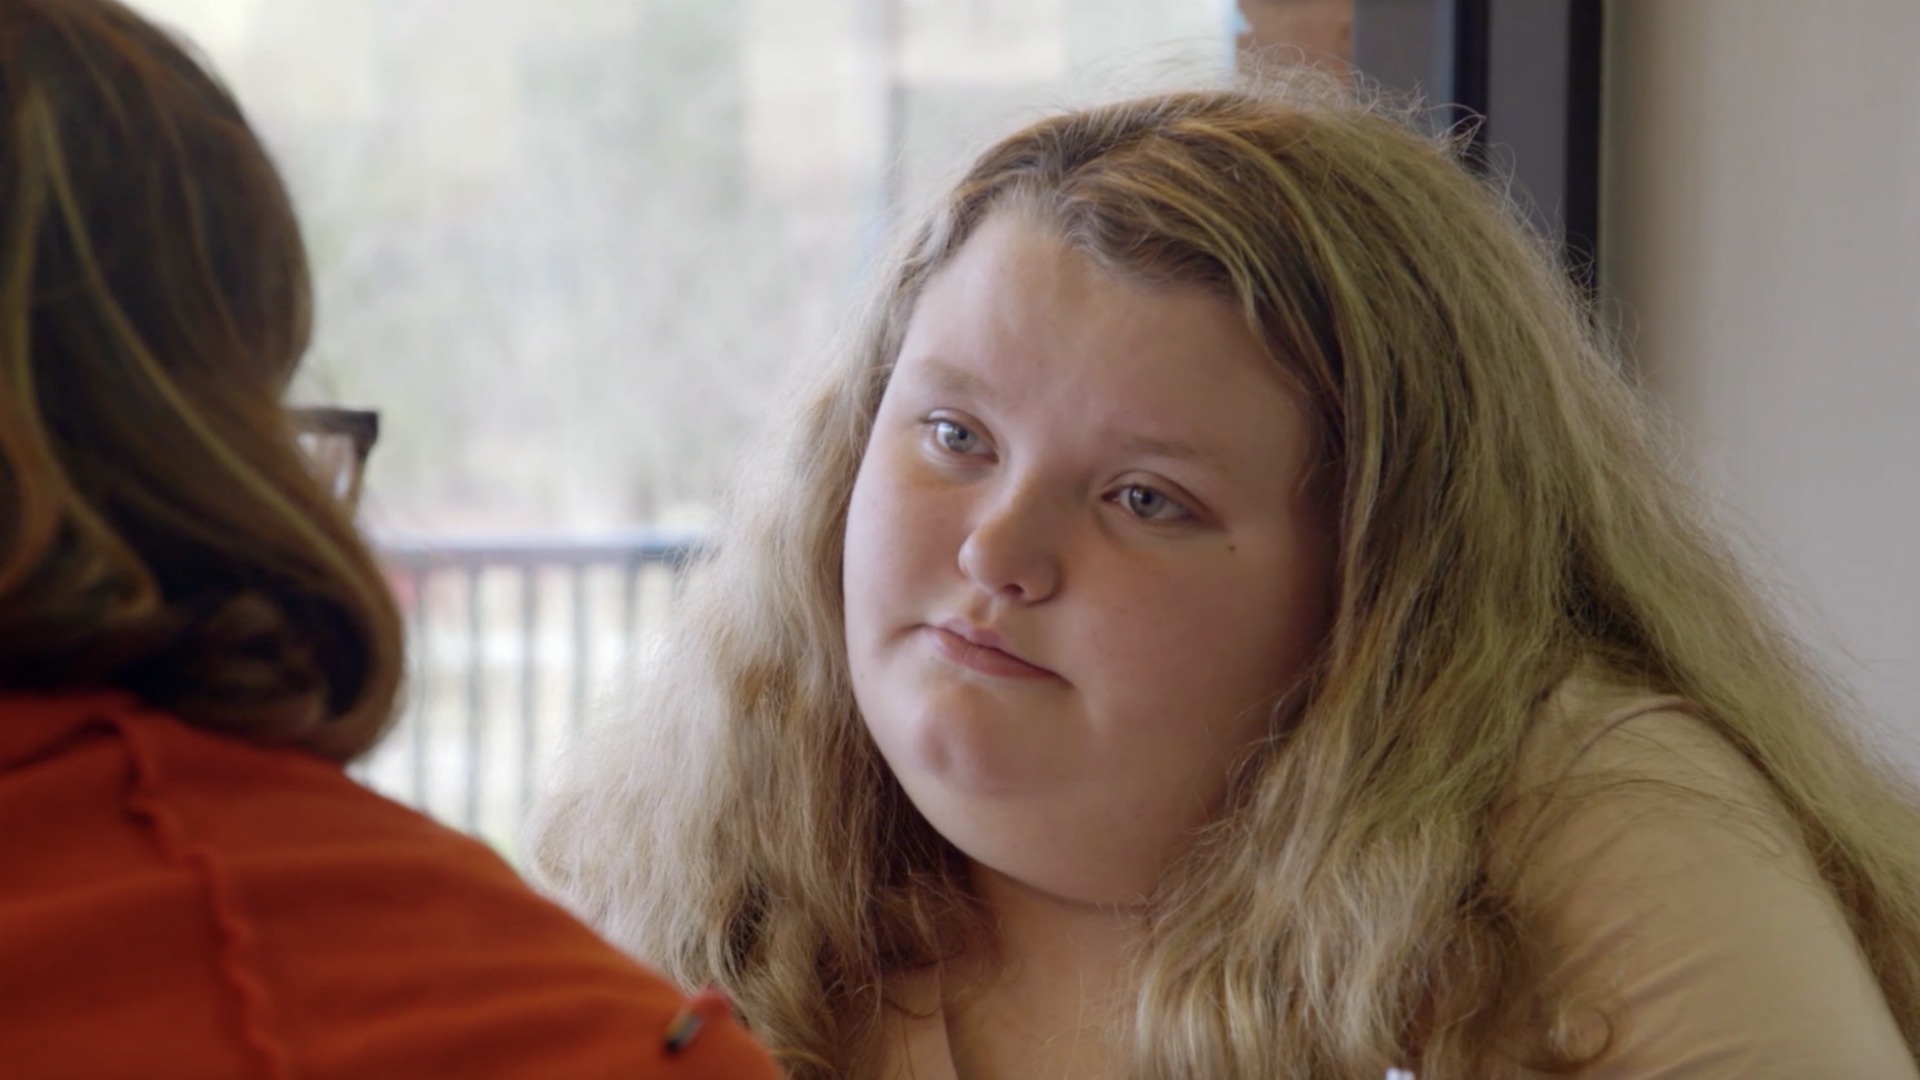 Watch Alana Feels Hurt by June | Mama June: From Not to Hot Video Extras